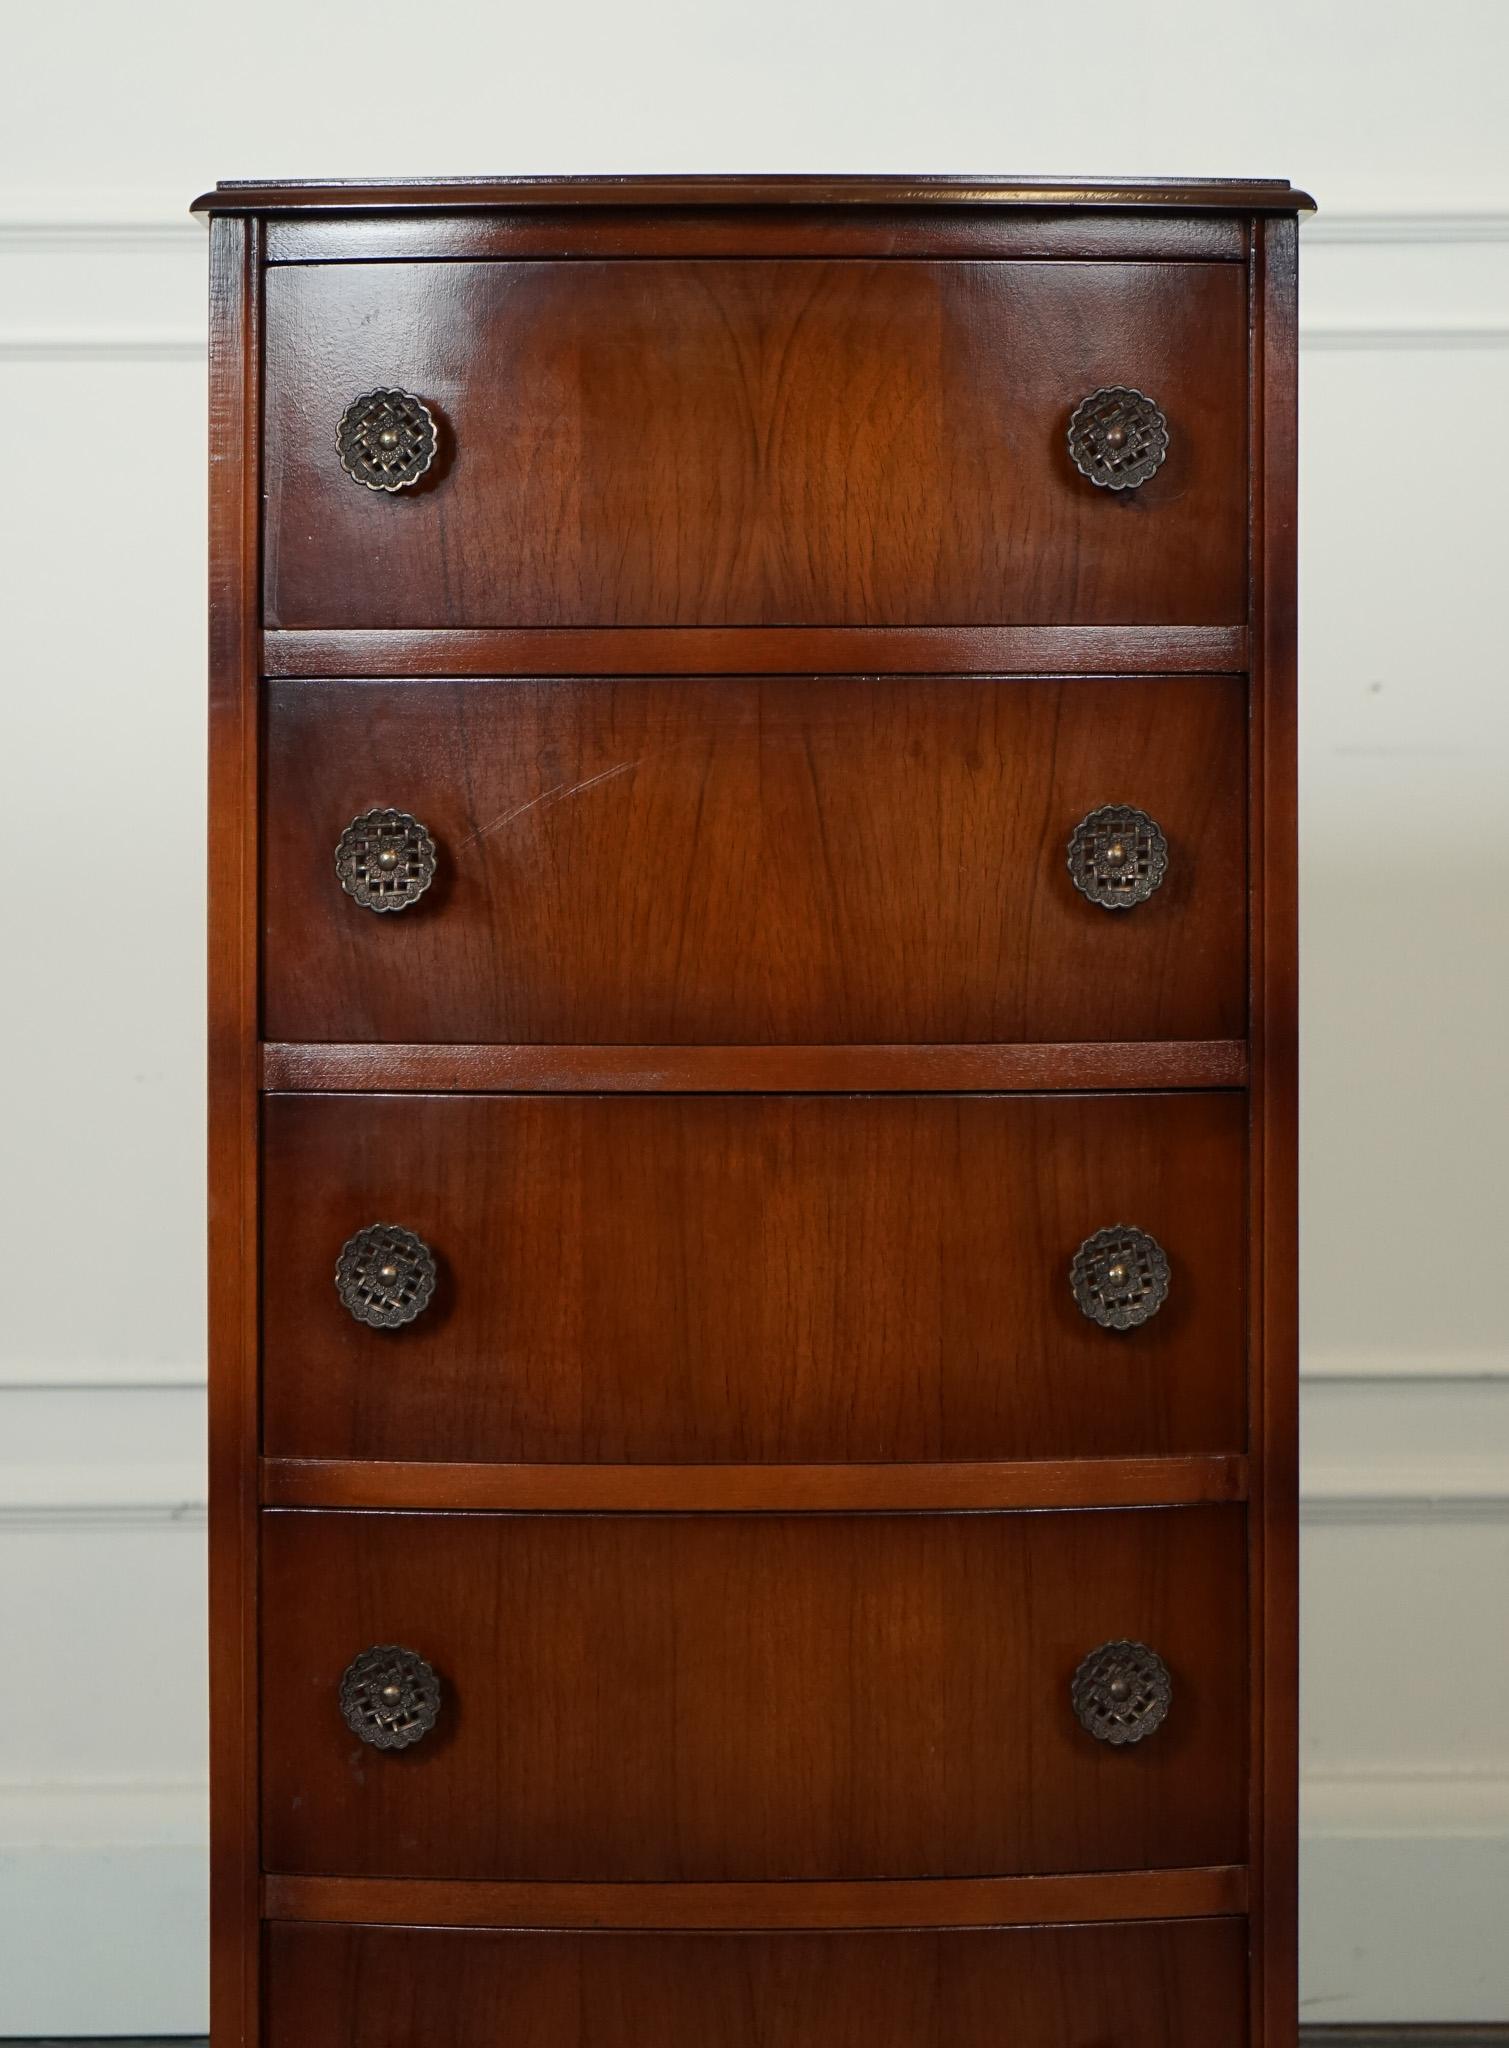 Hand-Crafted ViNTAGE ART DECO BOW FRONTED MAHOGANY TALL BOY CHEST F DRAWERS QUEEN ANN LEGS J1